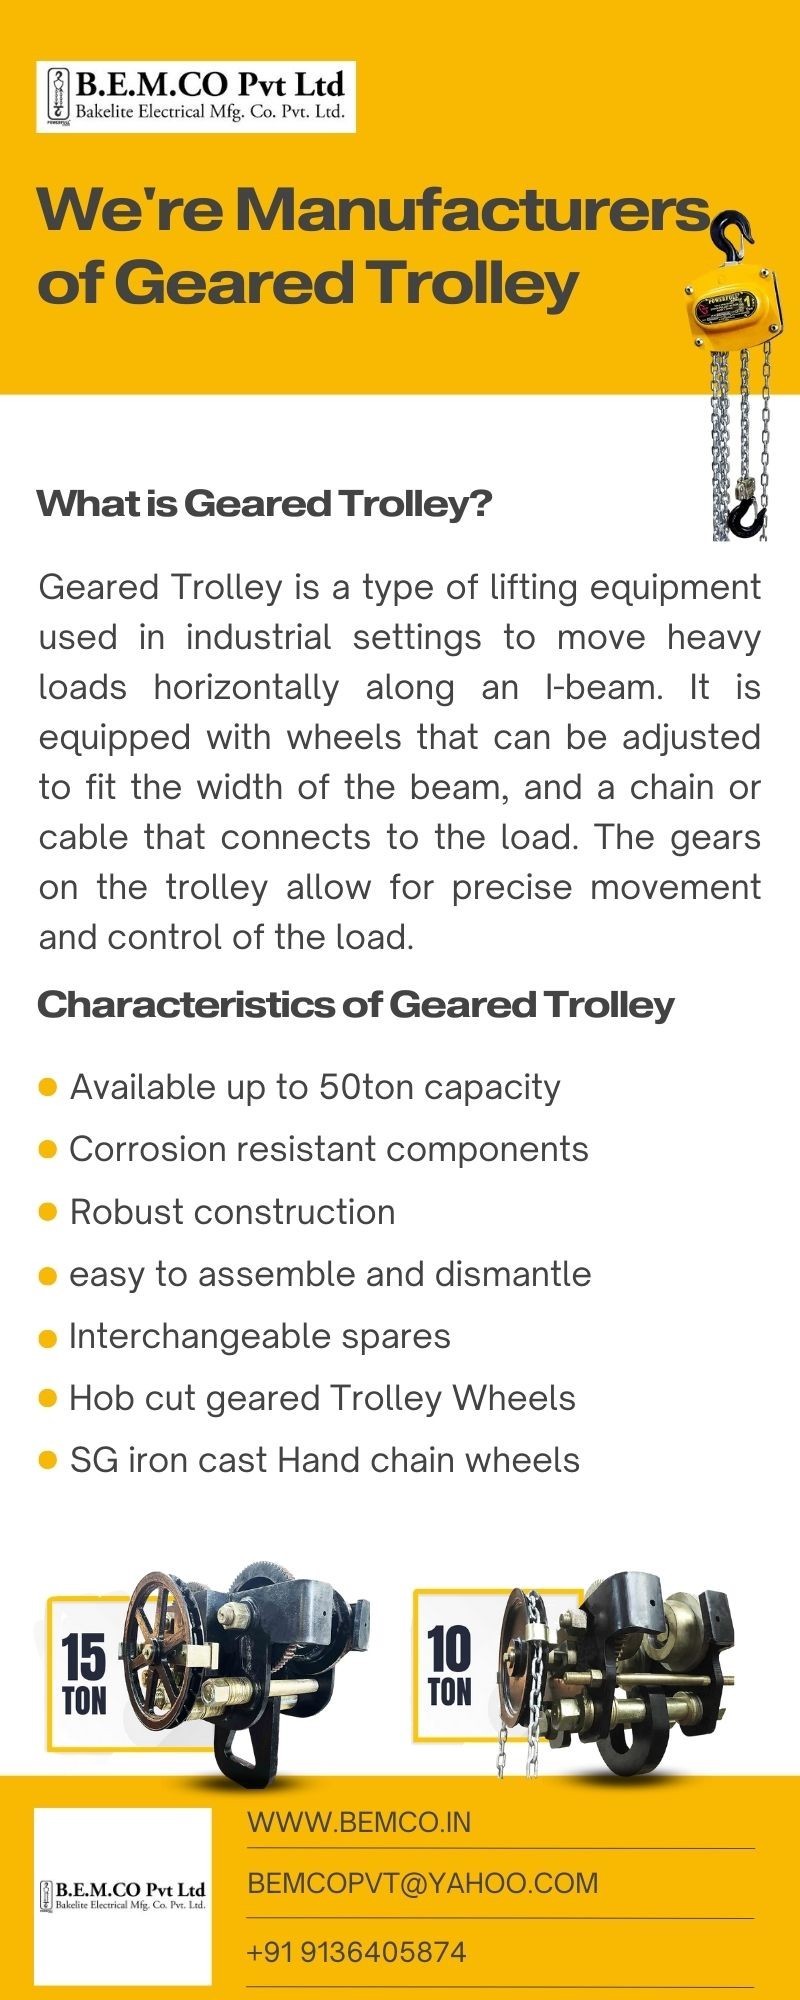 Primary Details About Geared Trolley - Bemco